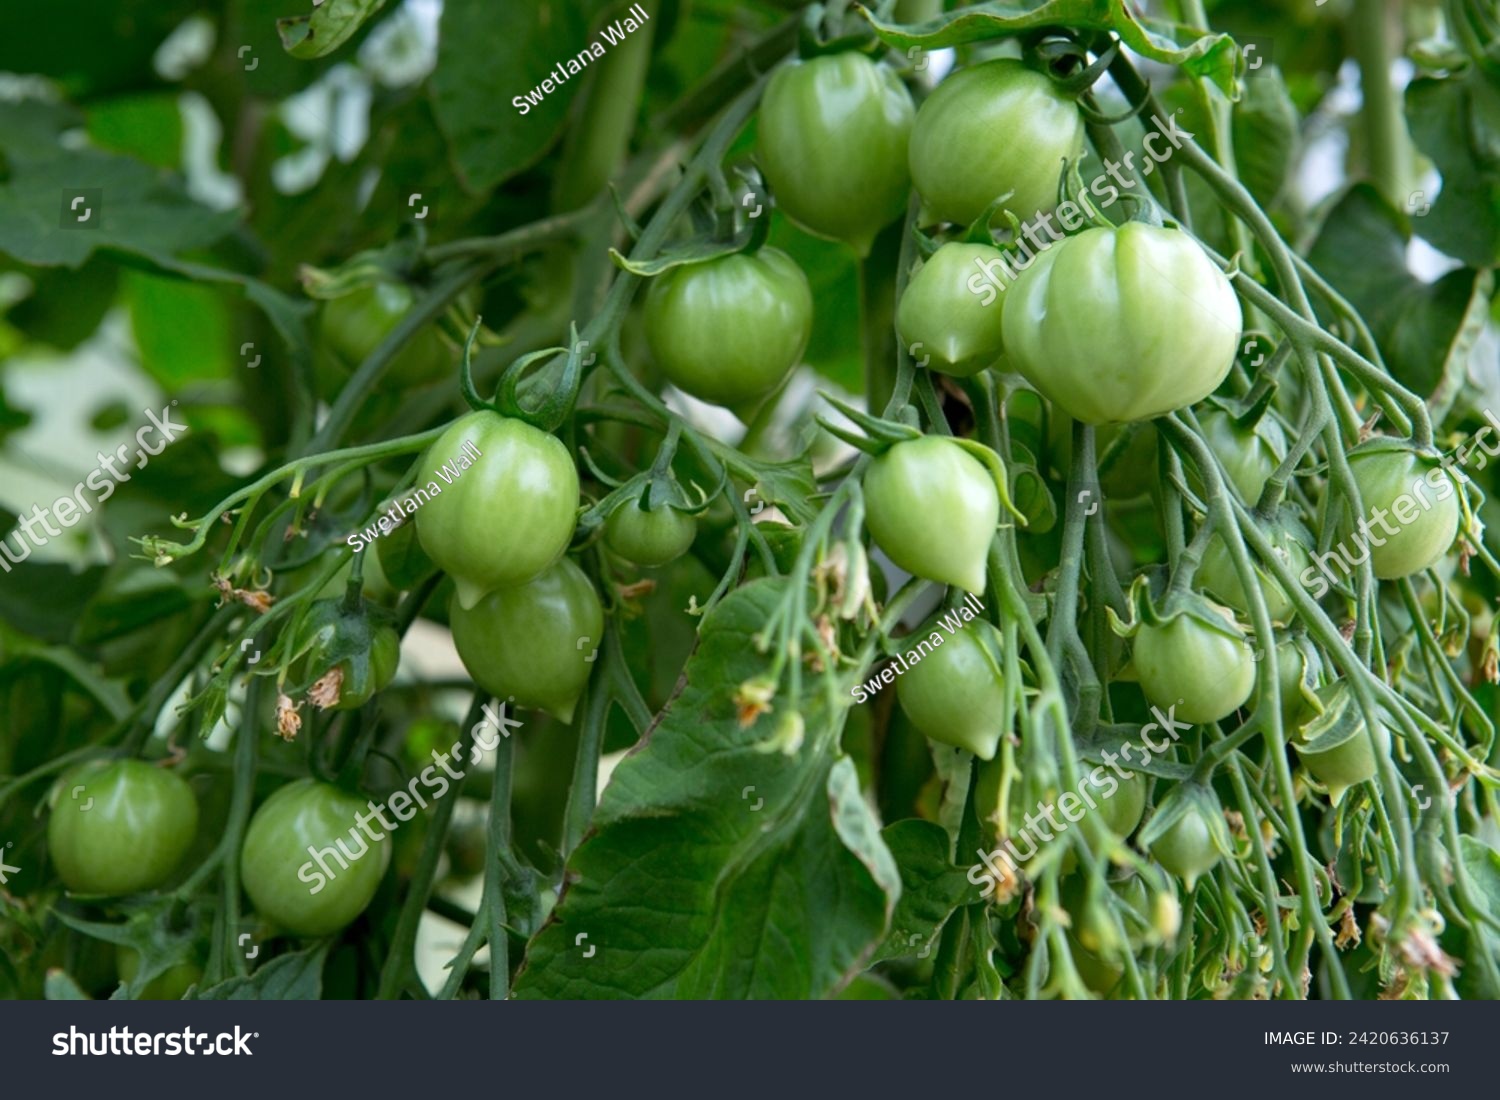 Fresh green tomatoes and some that are not ripe yet hanging on the vine of a tomato plant in the garden. #2420636137